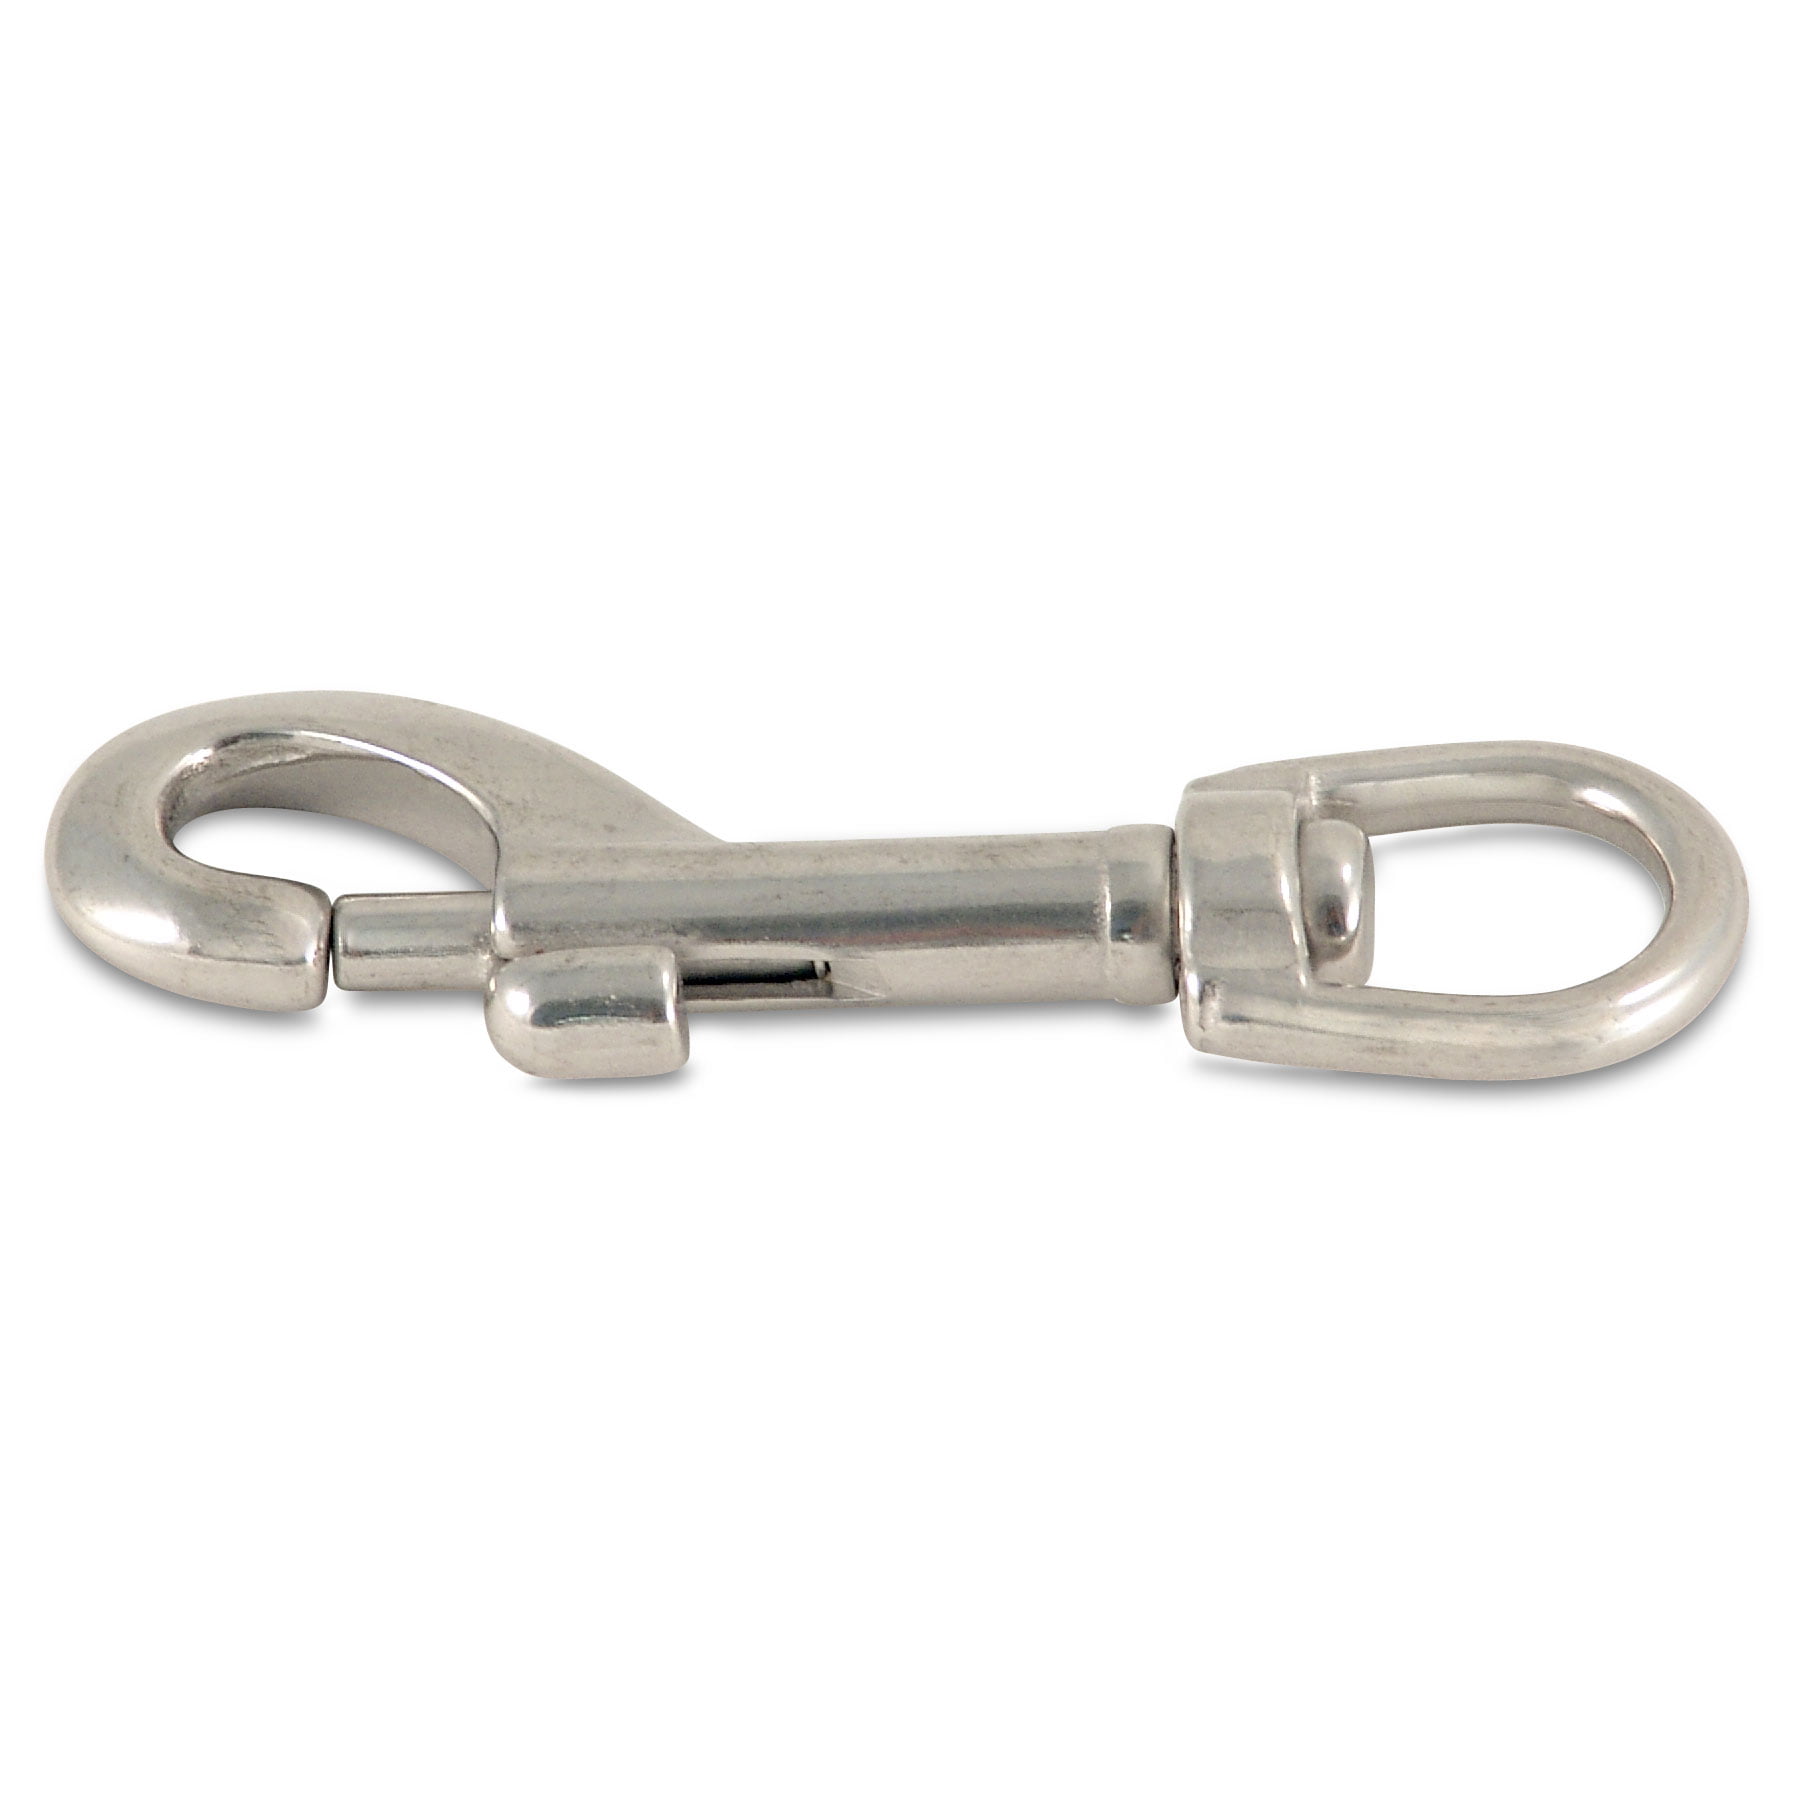 5 pk Campbell Chain  Galvanized  Forged Steel  Eye and Eye Swivel  700 lb 